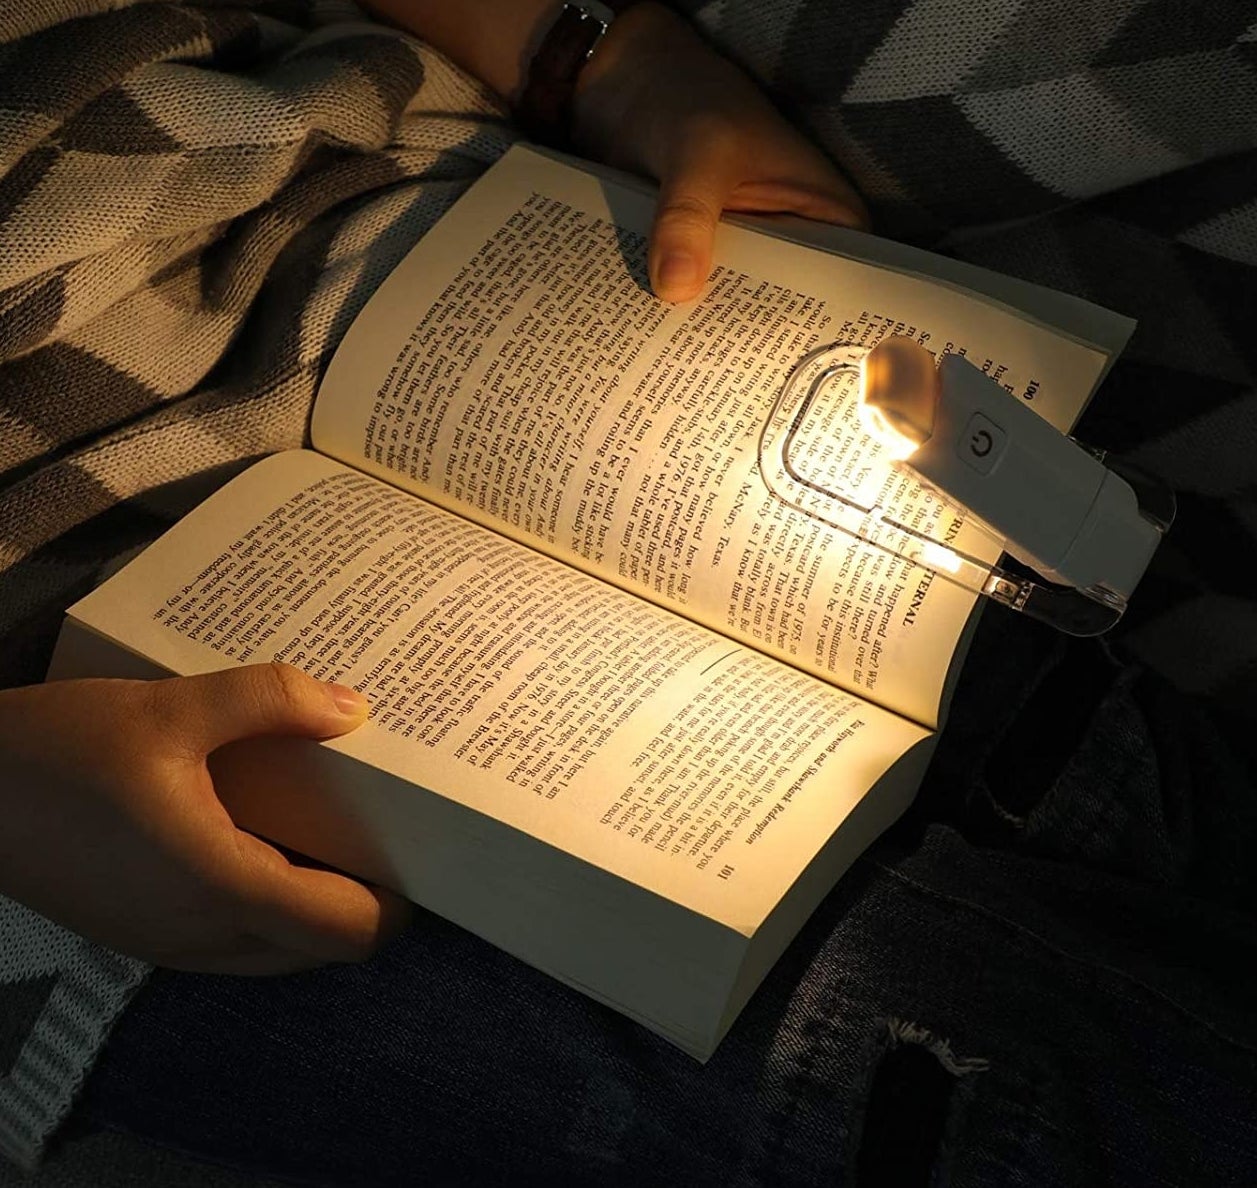 A person using the book light to illuminate the pages of their novel